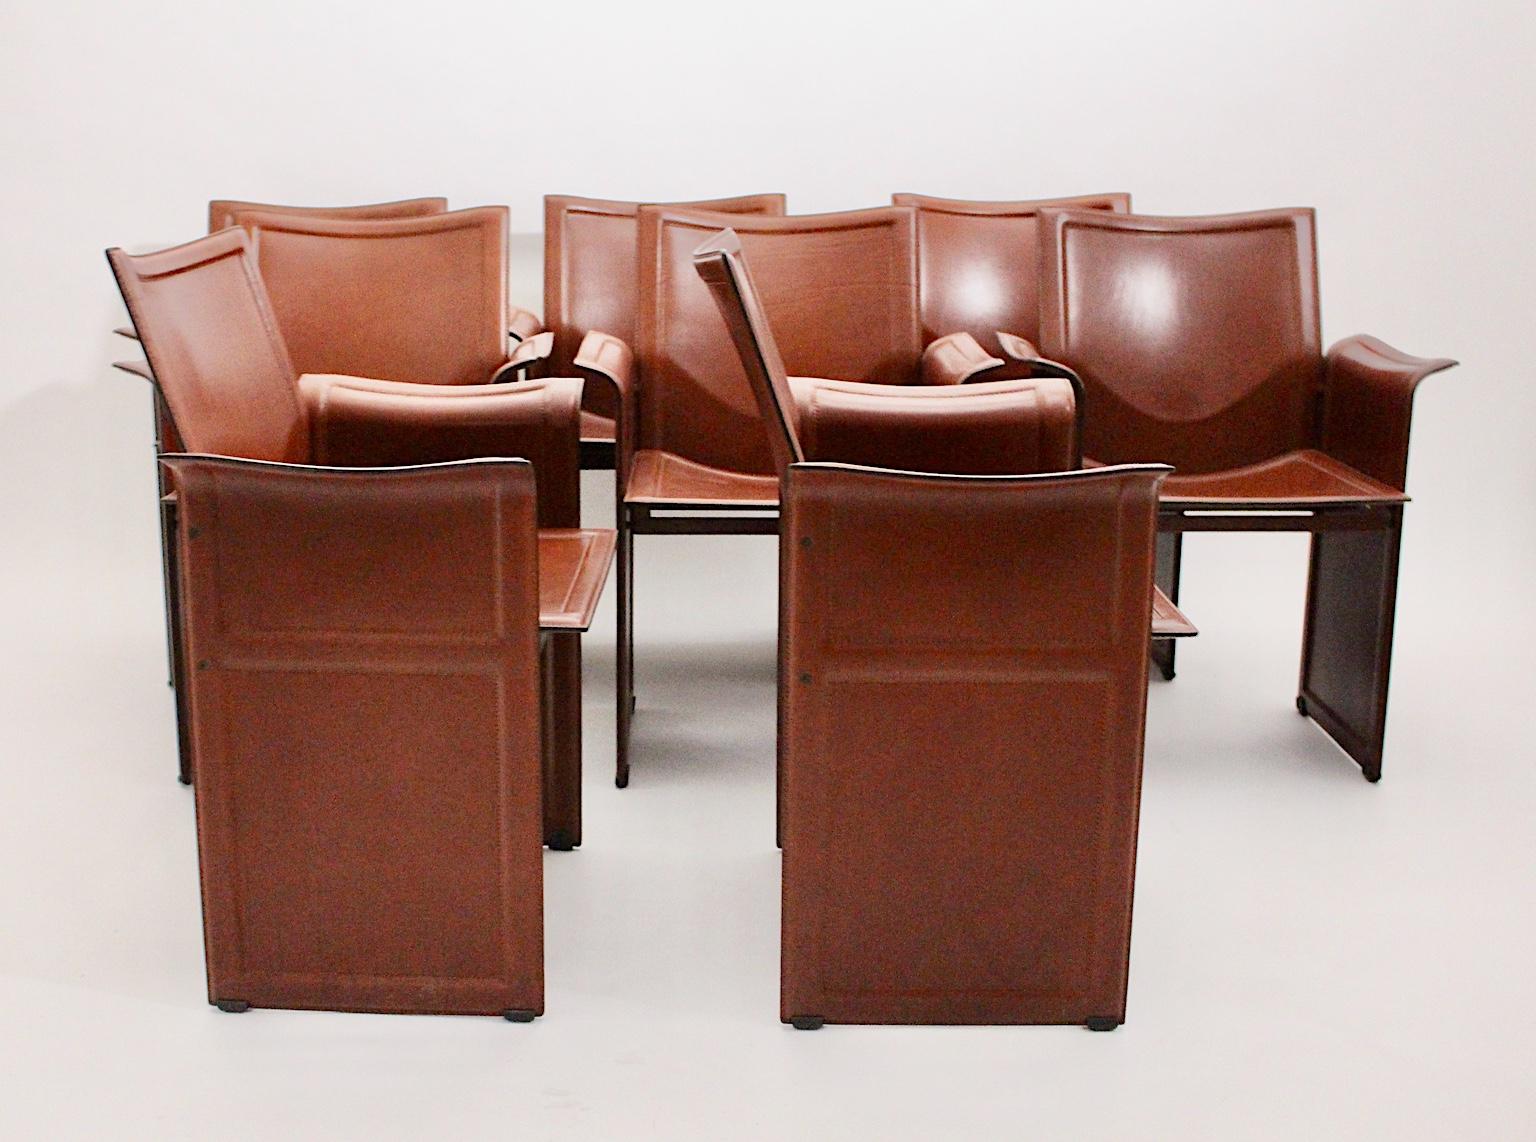 Modern Brown Leather Vintage Dining Chairs Tito Agnoli for Matteo Grassi, 1979 For Sale 1